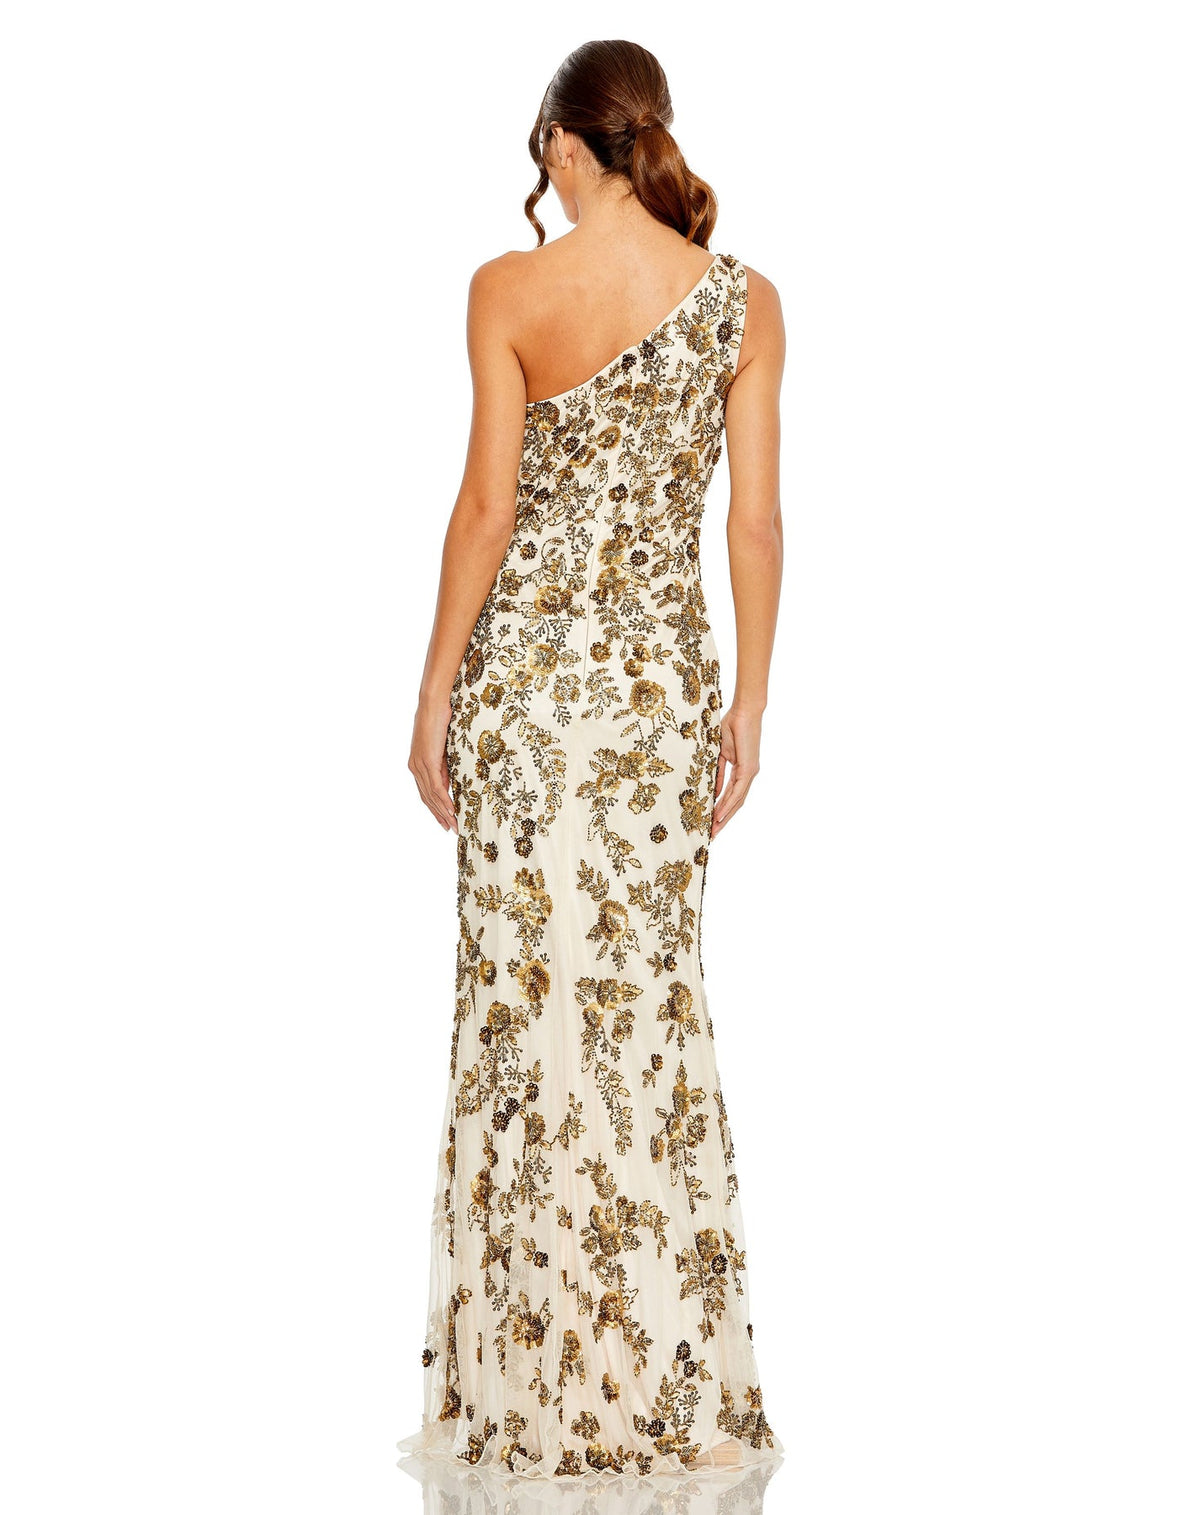 FLORAL BEADED ONE SHOULDER GOWN Champagne Gold Style #5955 back Mac Duggal